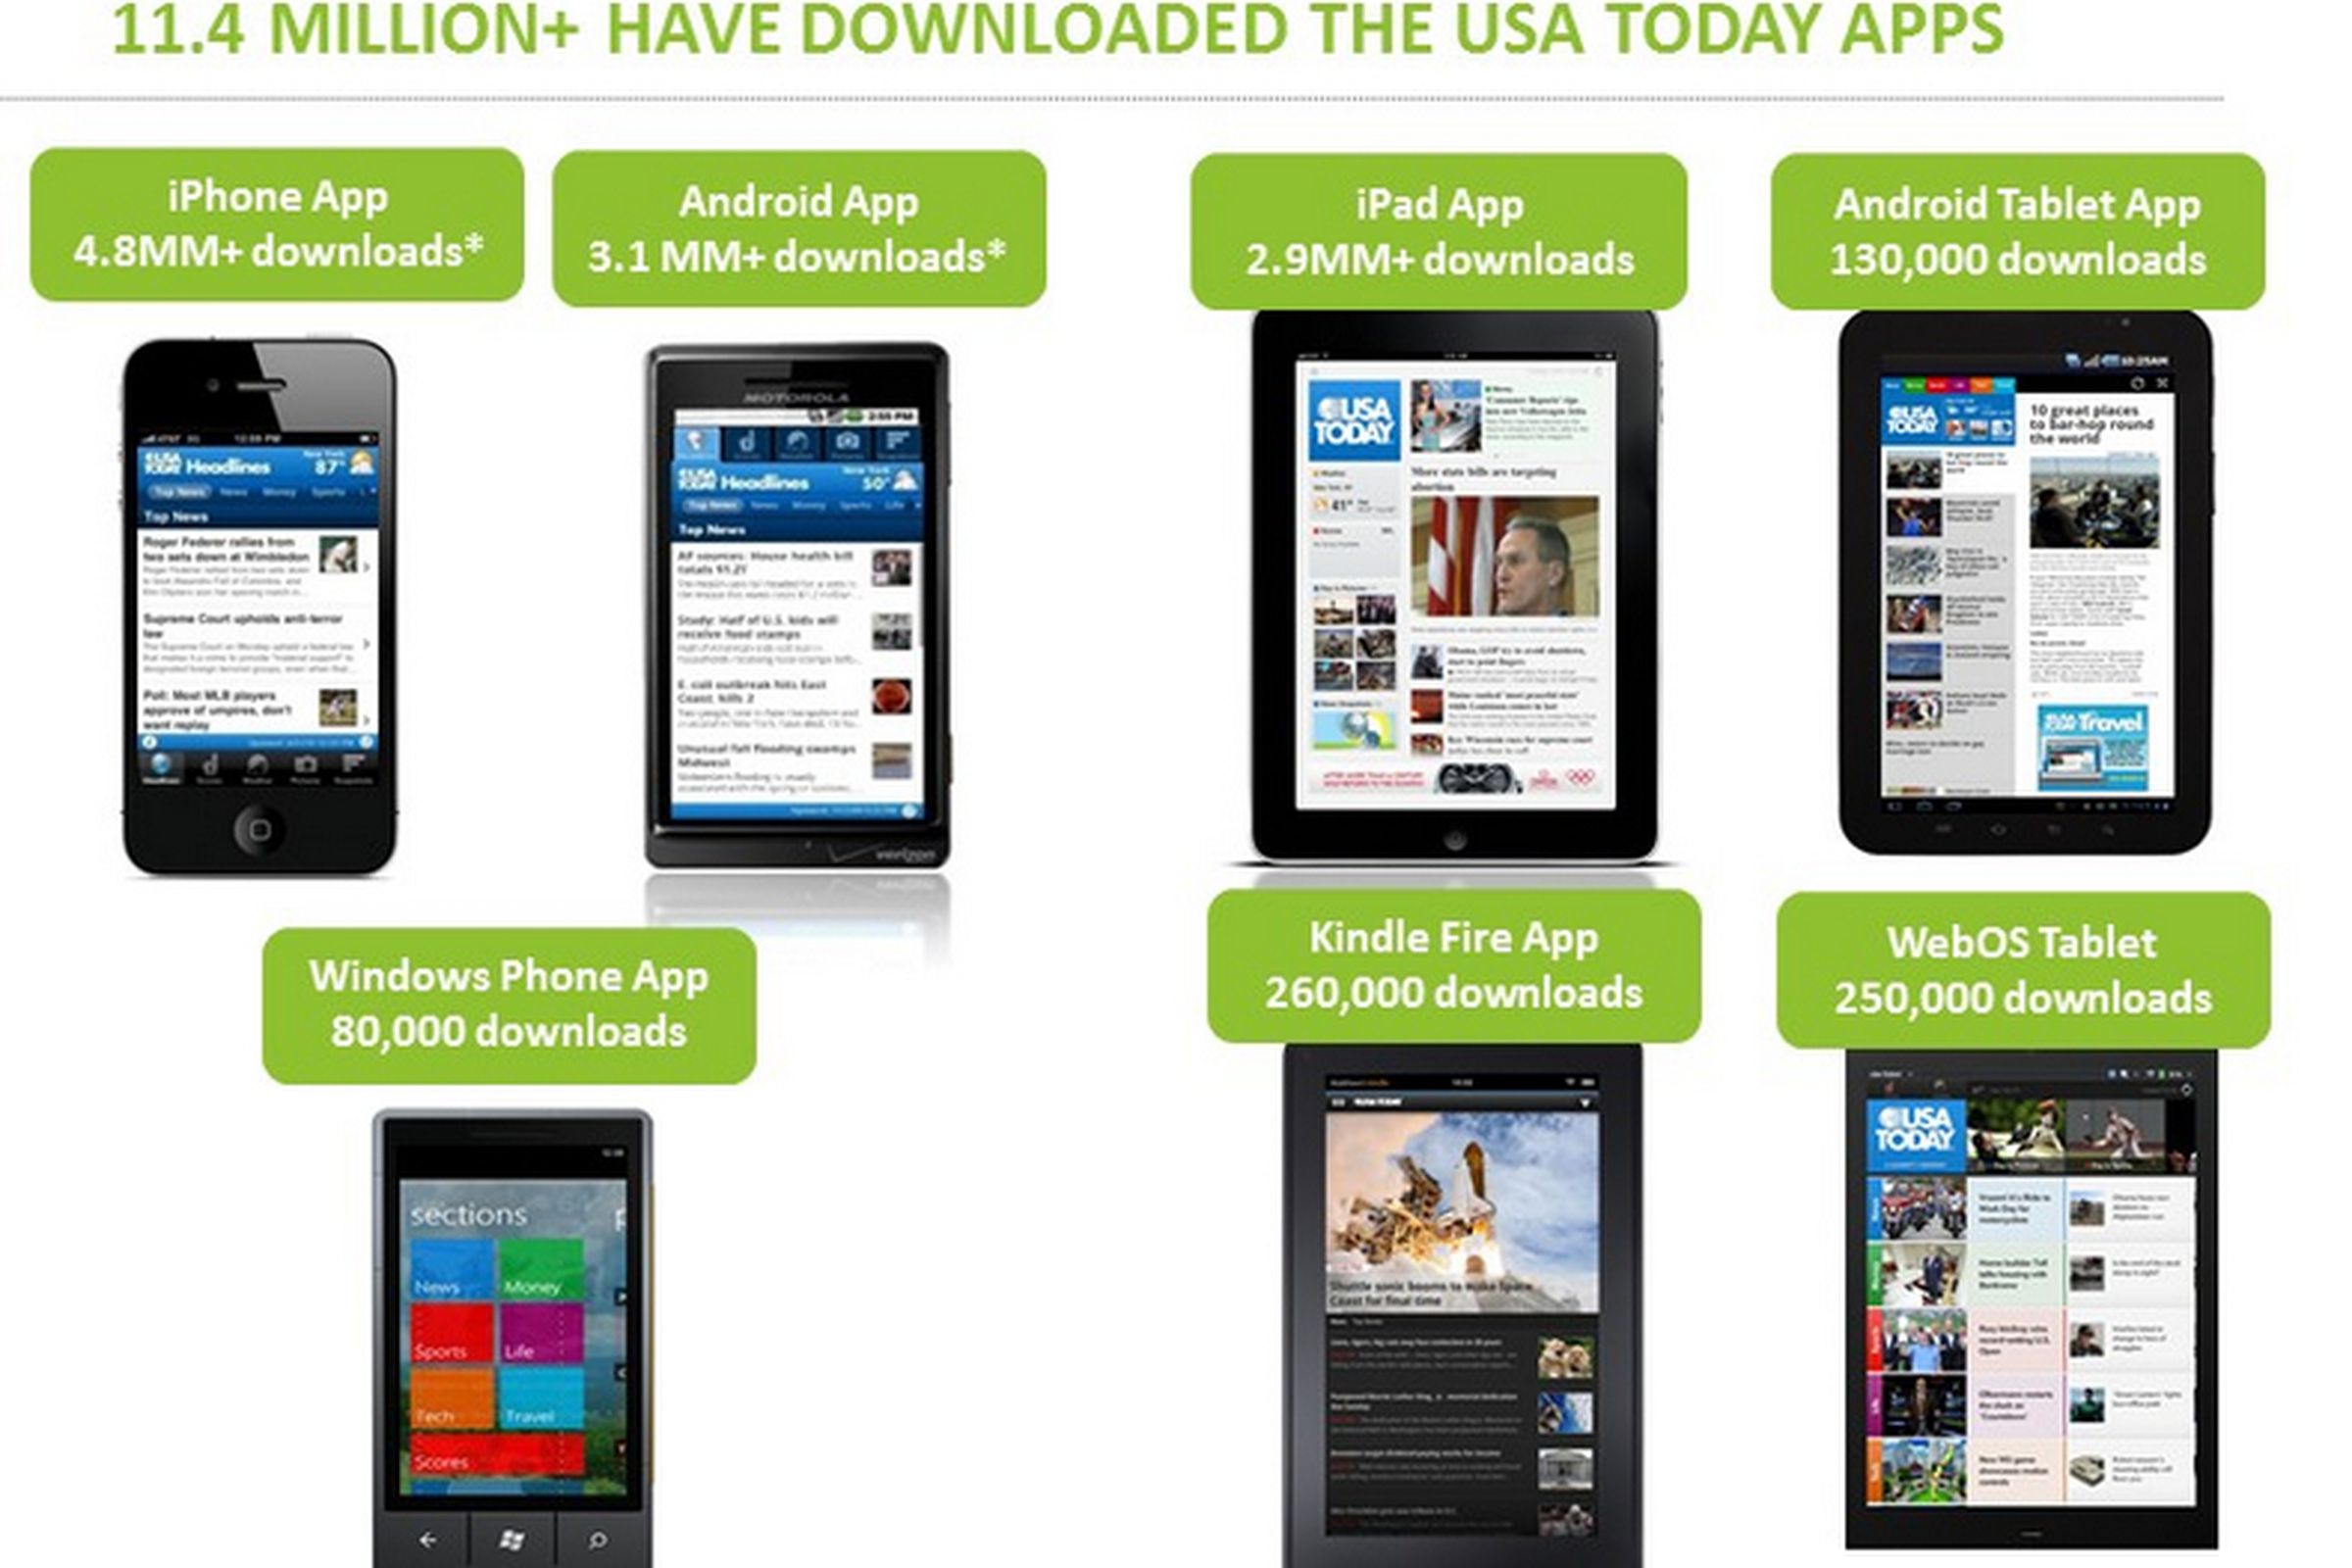 USA Today Tablet numbers